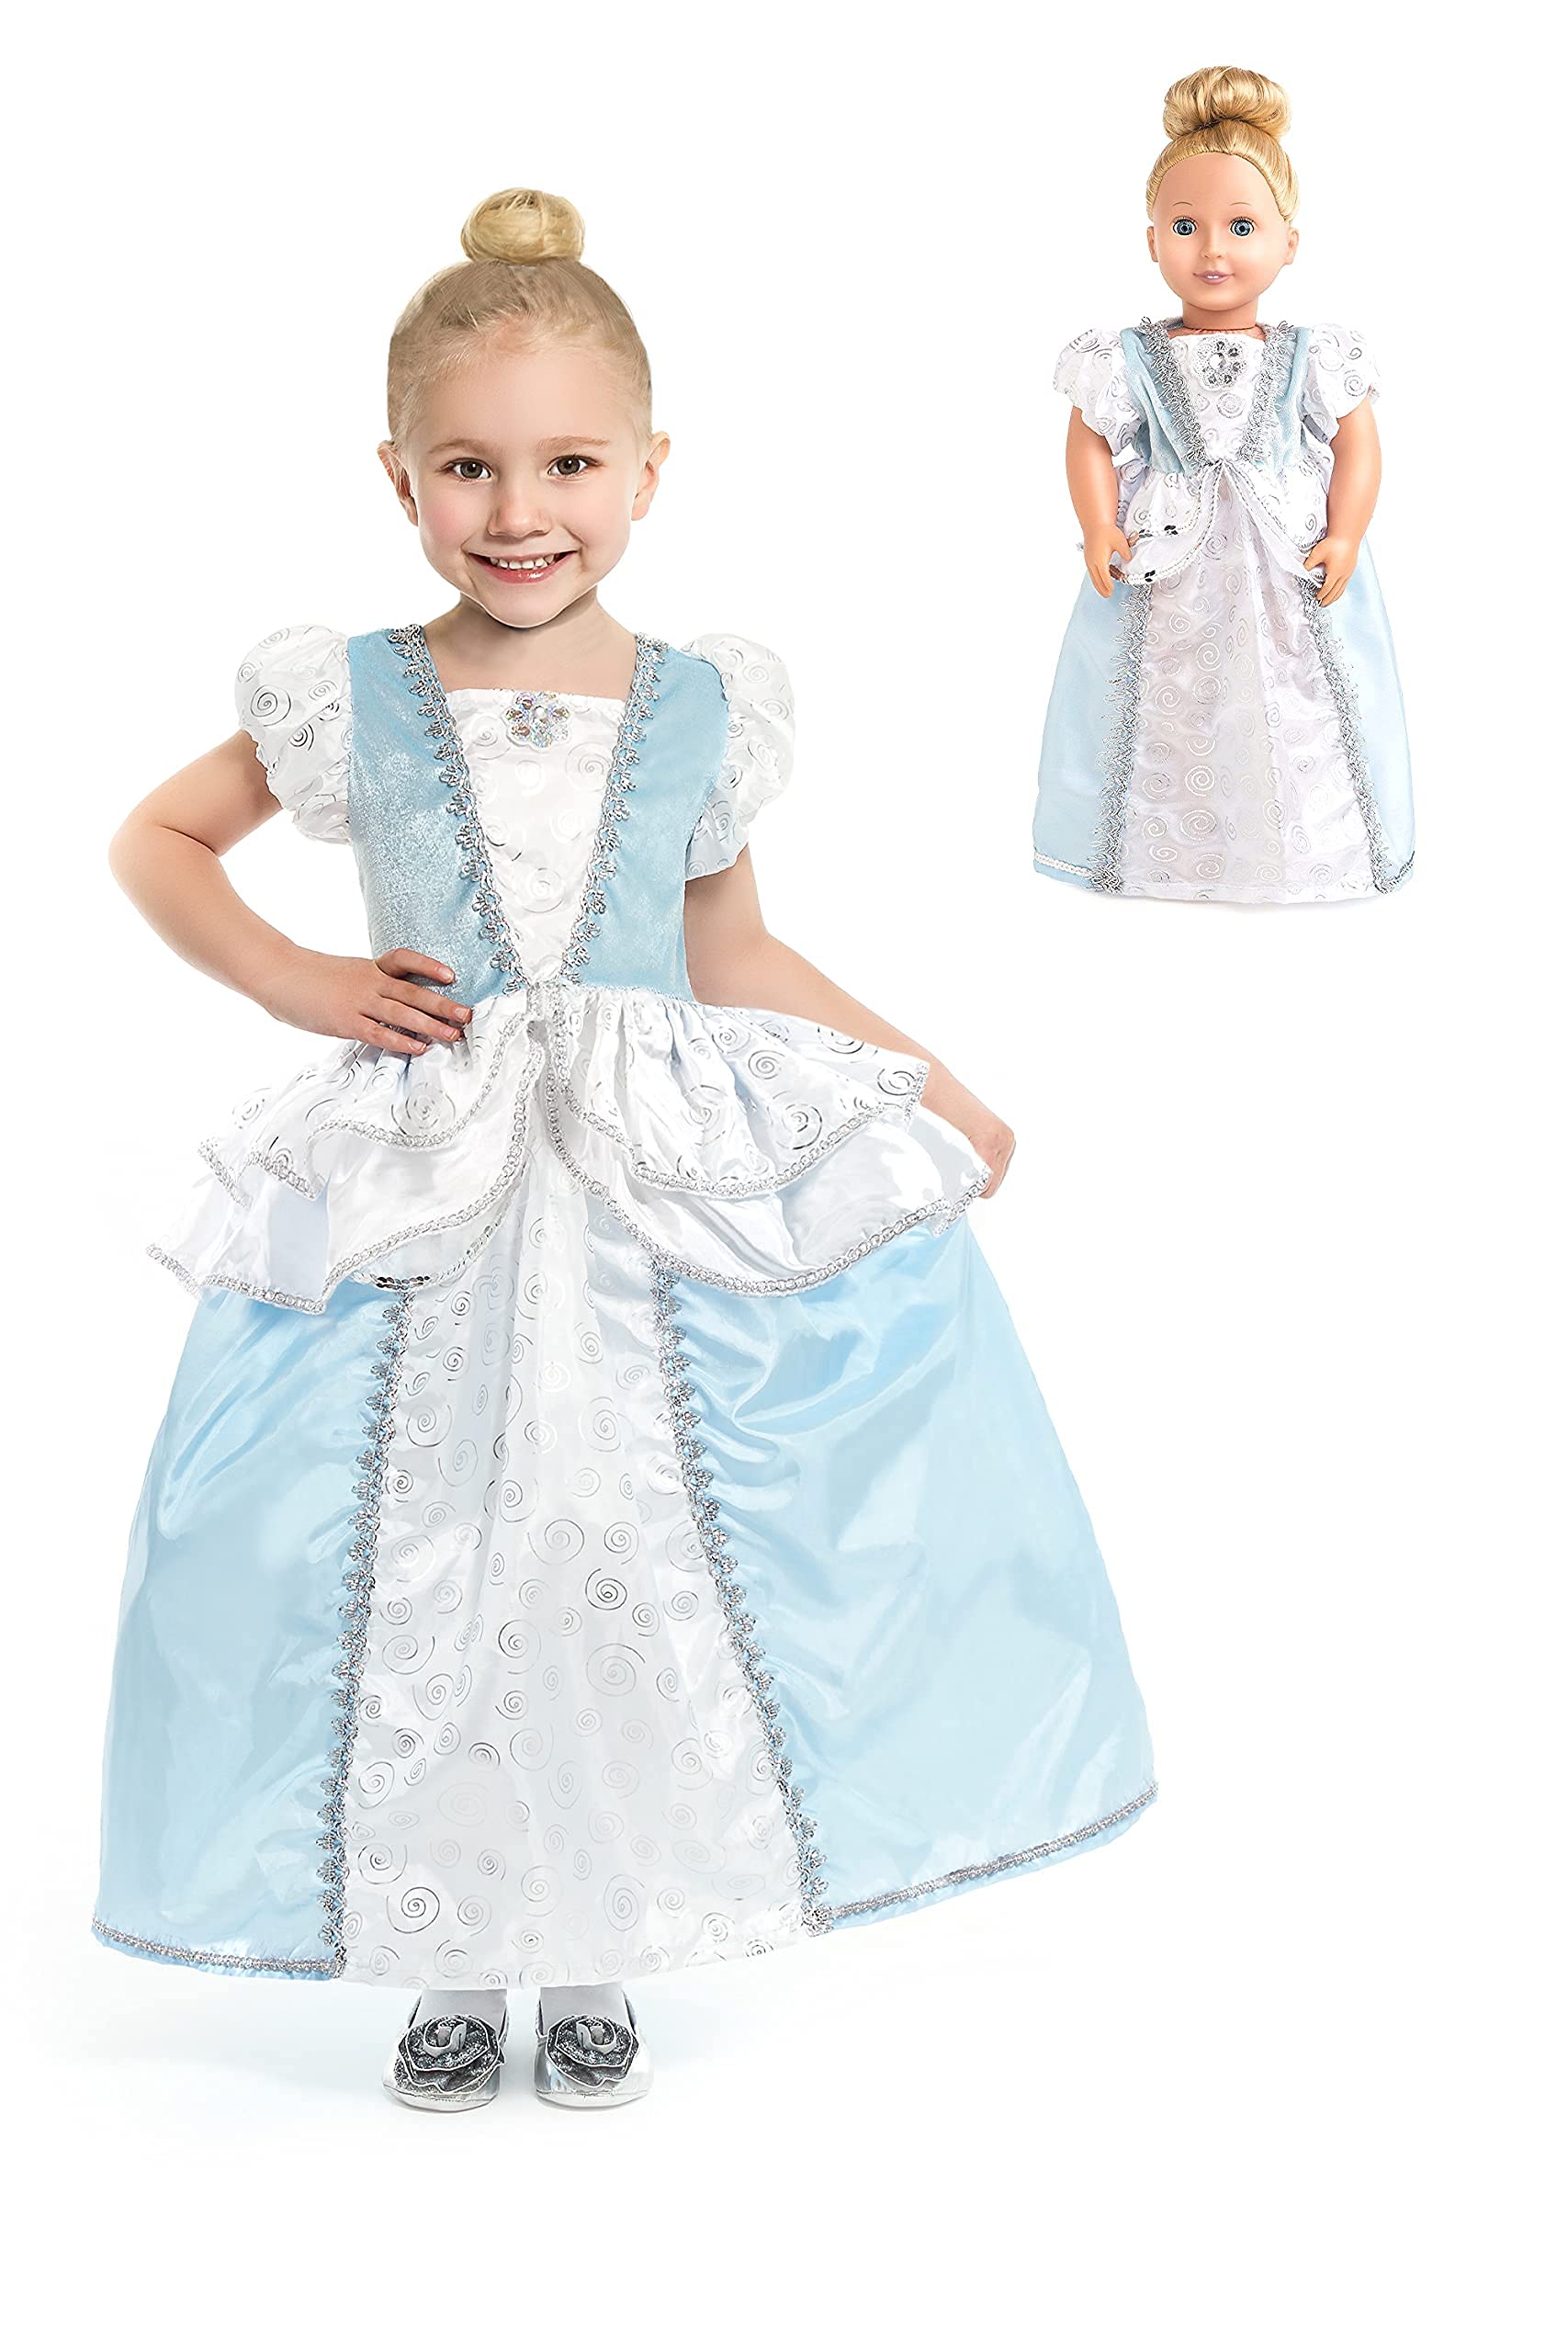 Little Adventures Cinderella Princess Dress Up Costume (Med Age 3-5) with Matching Doll Dress - Machine Washable Child Pretend Play and Party Dress with No Glitter